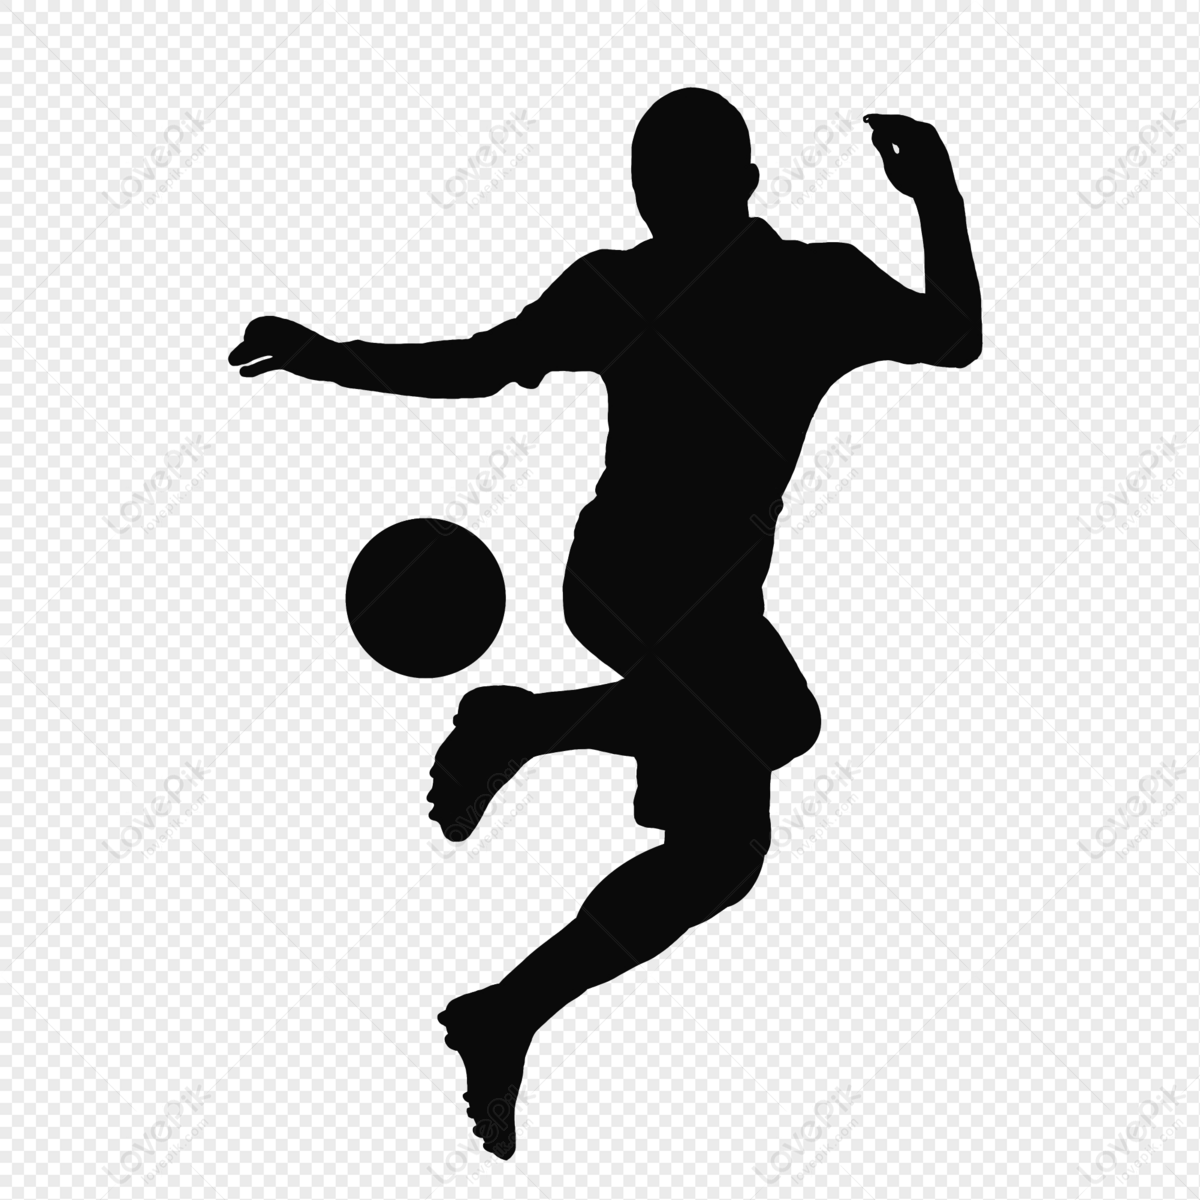 Kicking sport silhouette, material, soccer silhouette, sports png transparent background